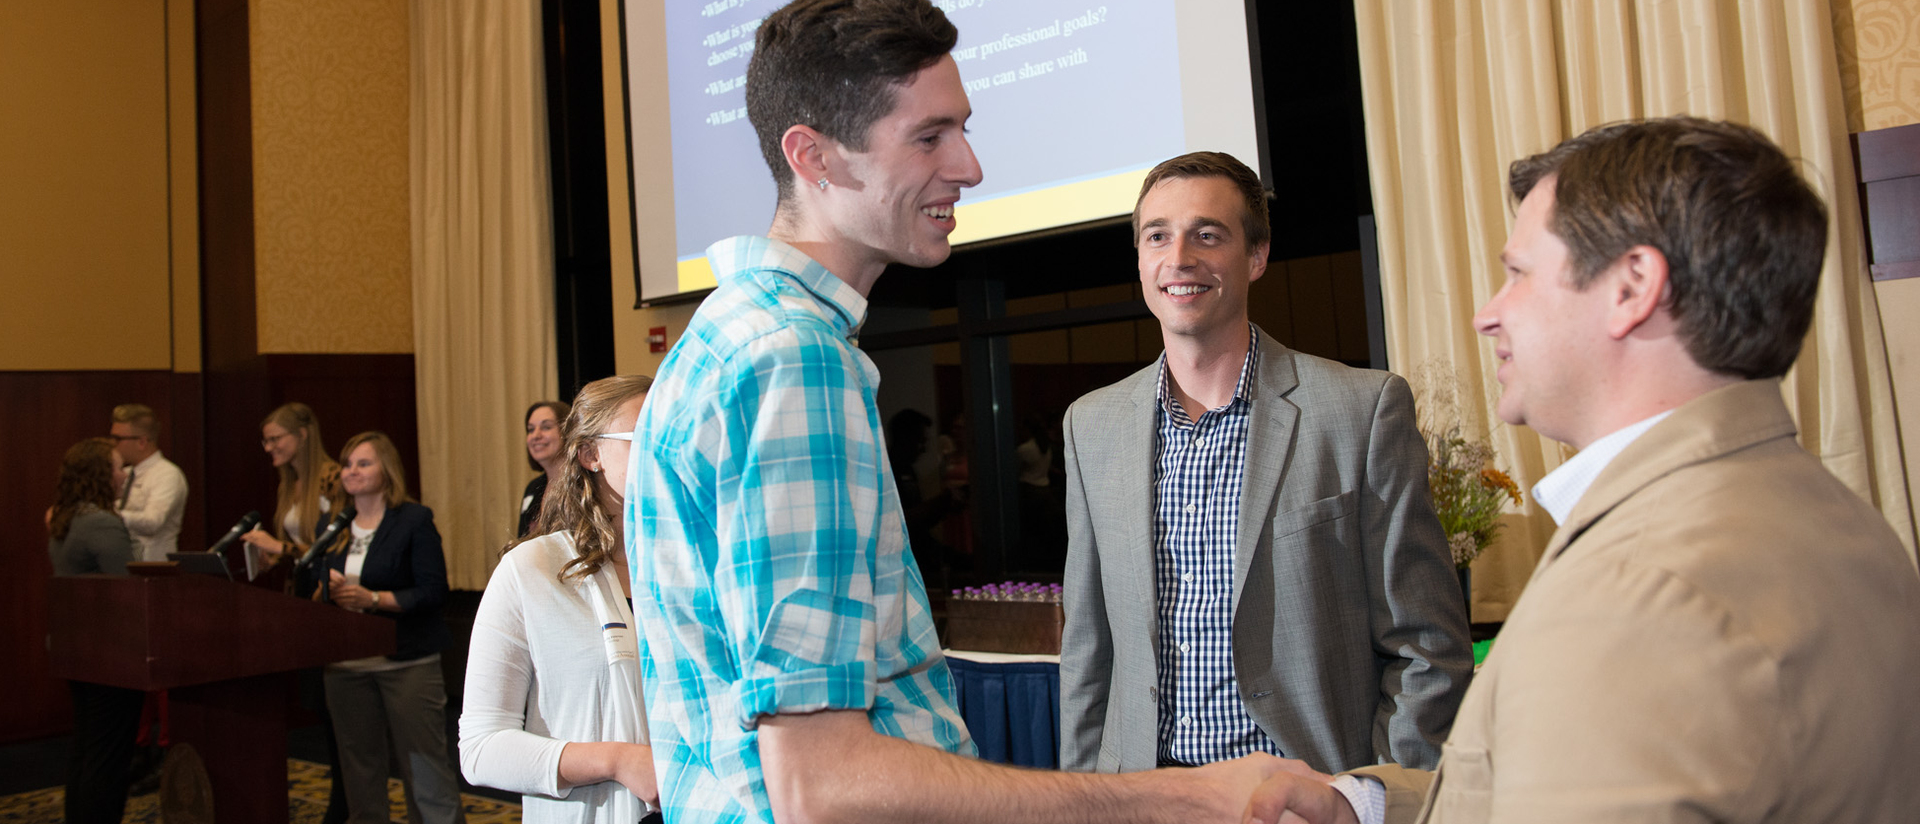 Student shaking hands at networking event